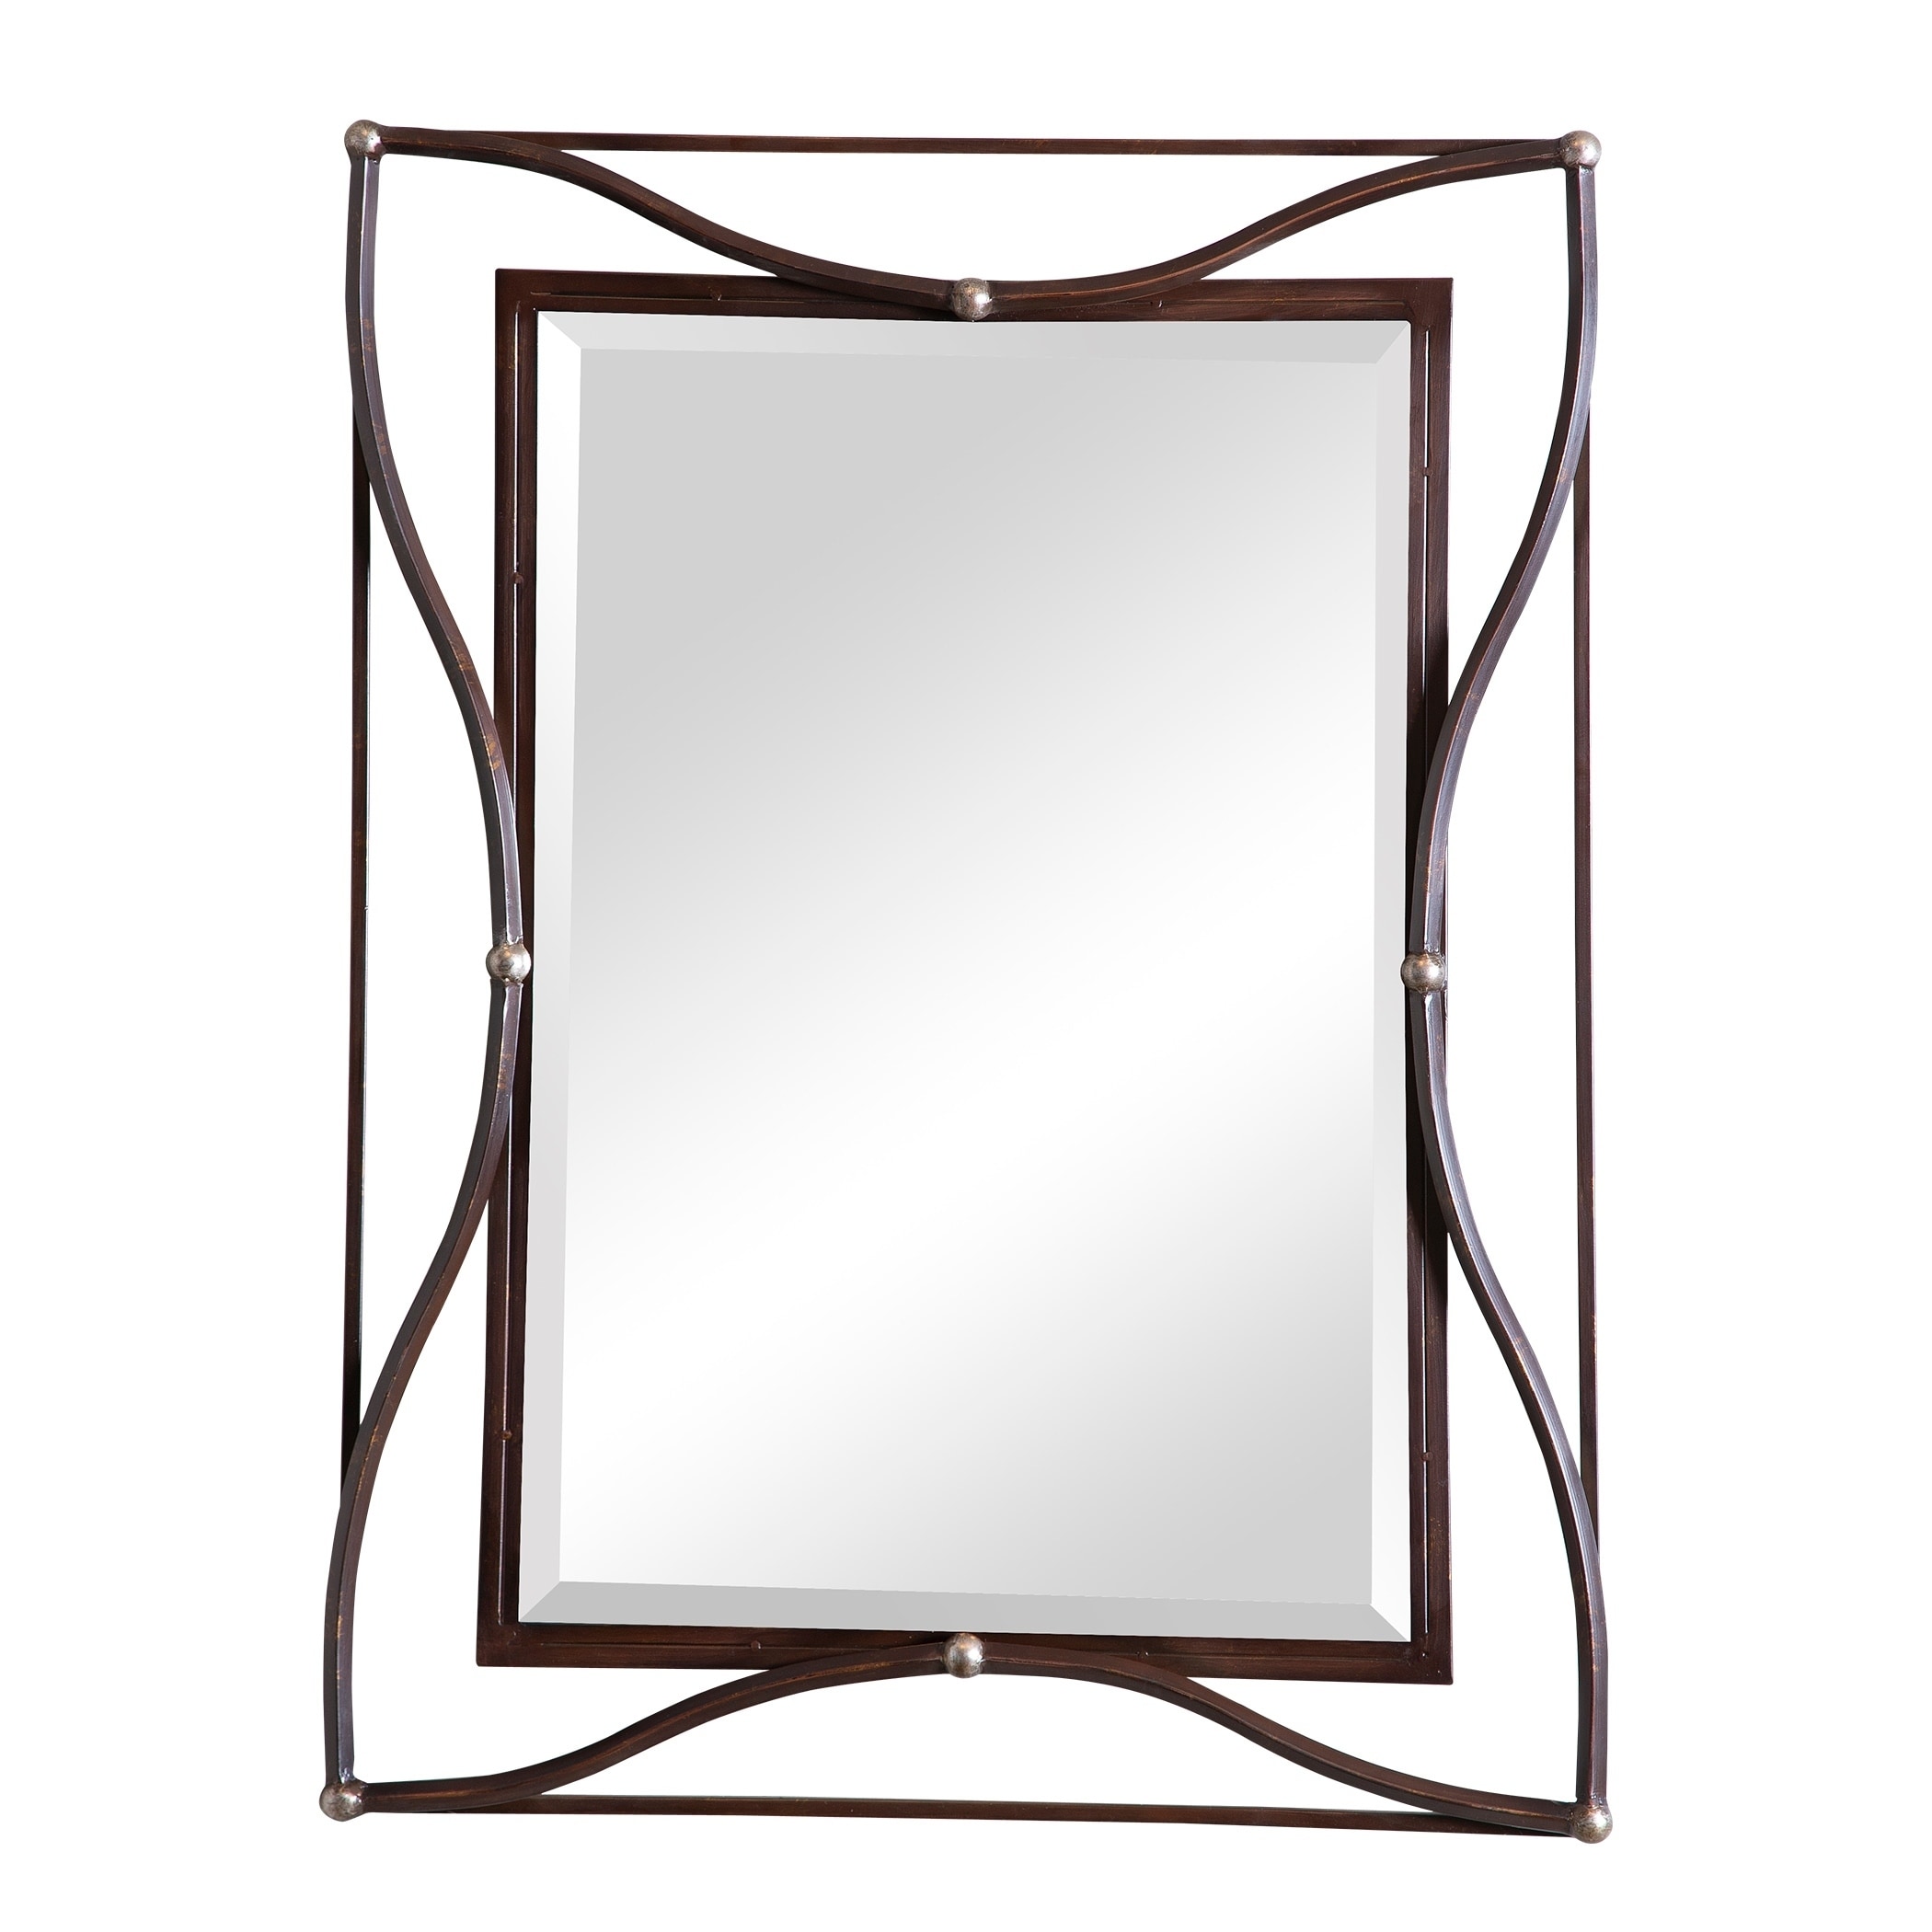 Thierry Double Scratched Bronze Framed Beveled Mirror